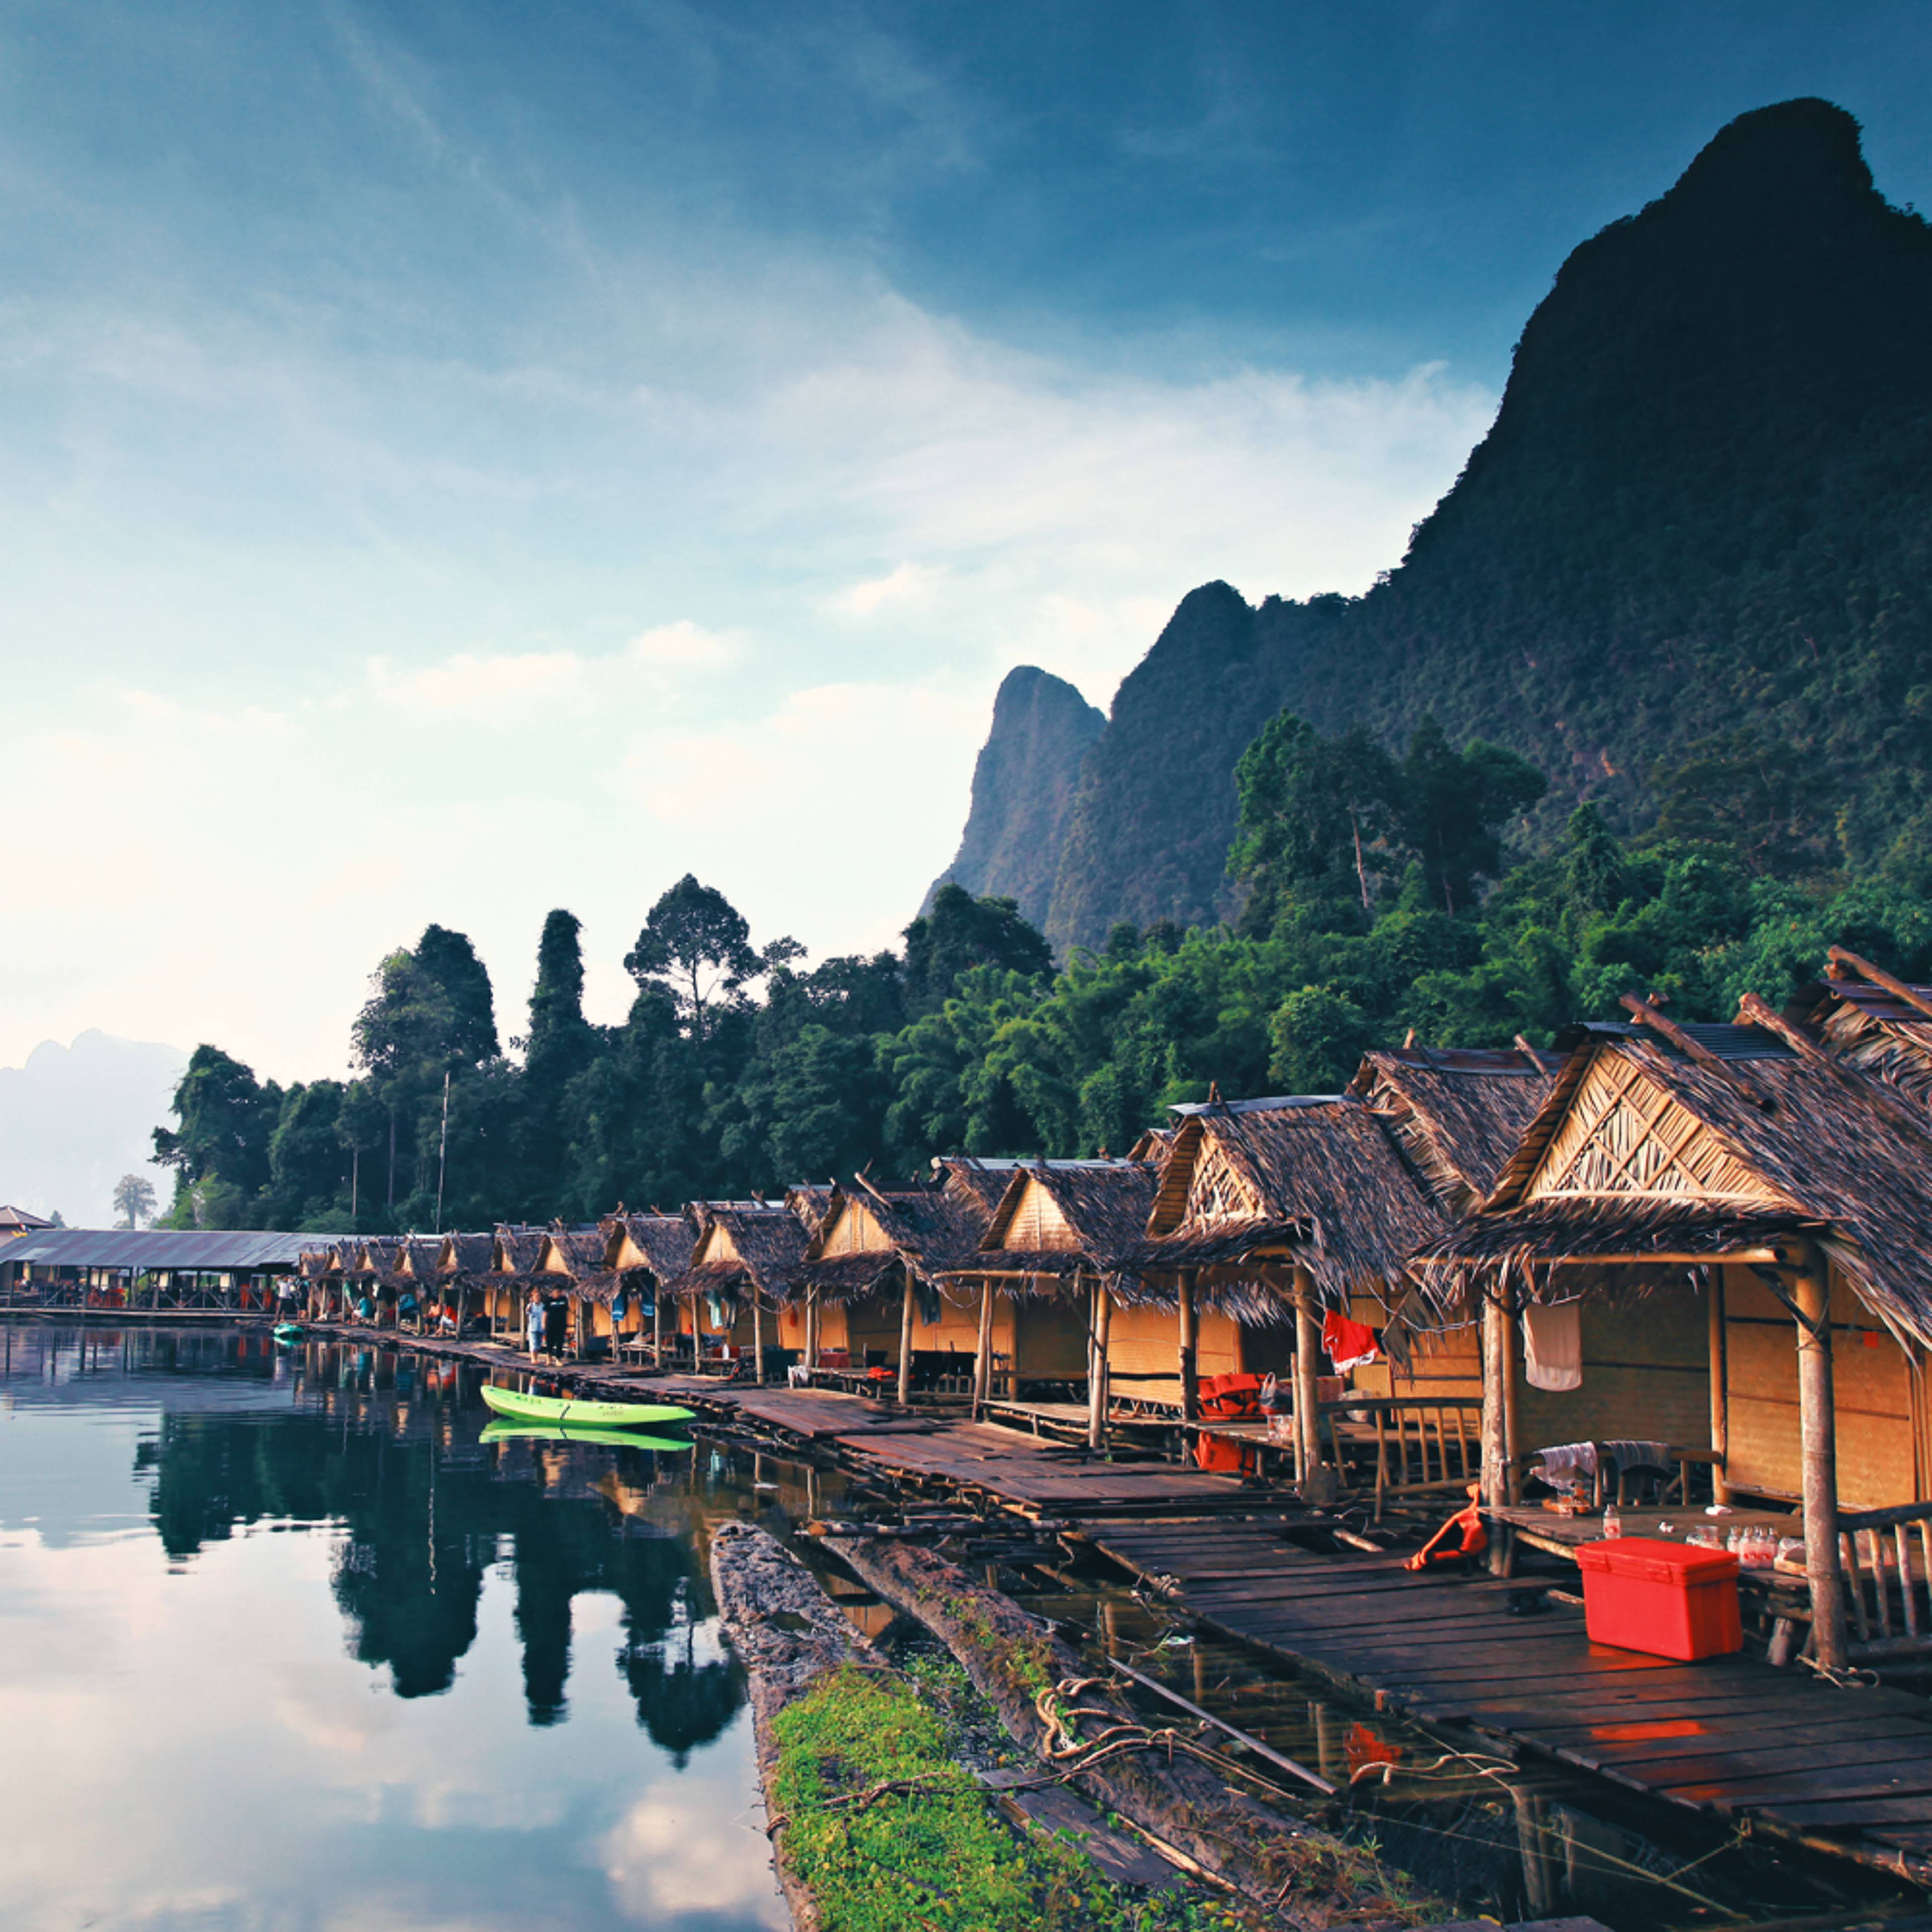 Experience Thailand off-the-beaten-track with a local expert